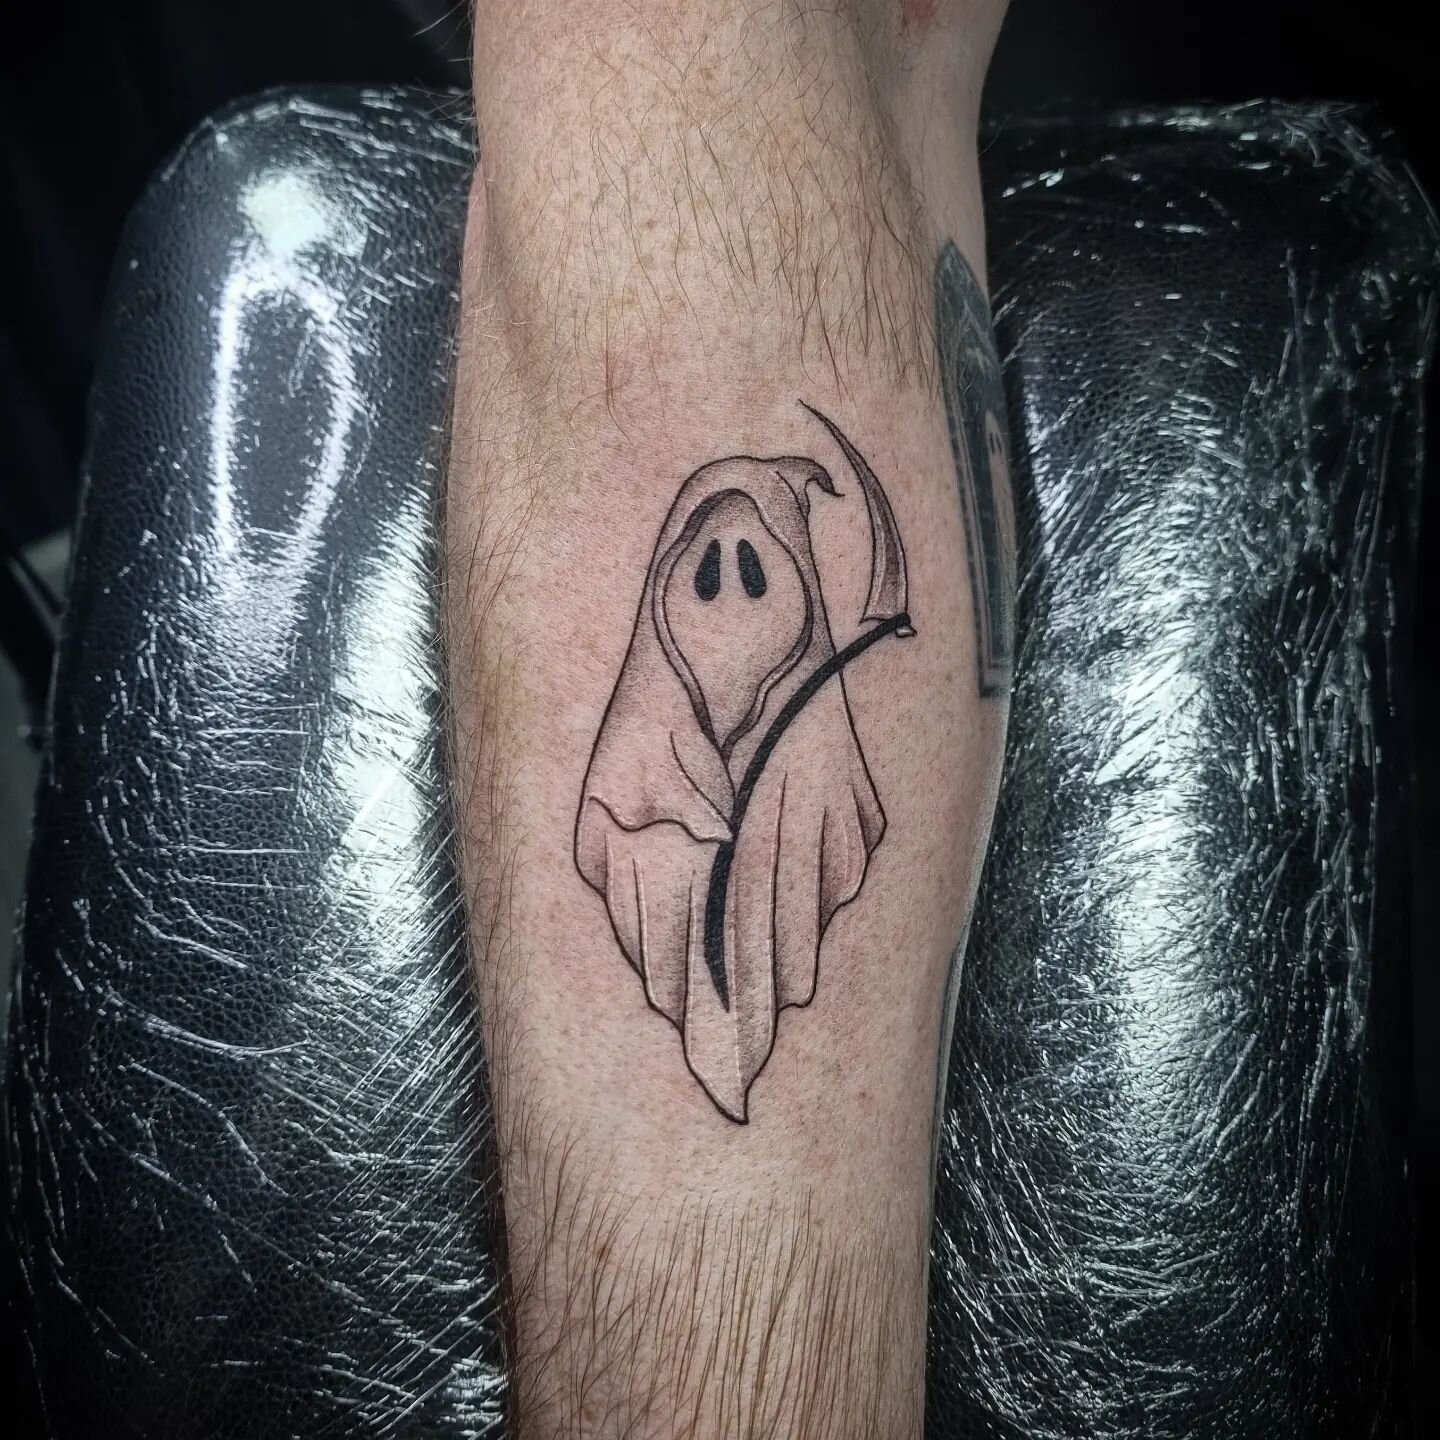 Little grim reaper ghost pulled from the get what you get! 👻

Lovee doing these! I have some space this week if anyone would like to book in 🖤

#tattoo #tattoodesigns #tattooflash #flashtattoo #flashdesigns #tattooartist #neotraditional #neotrad #n